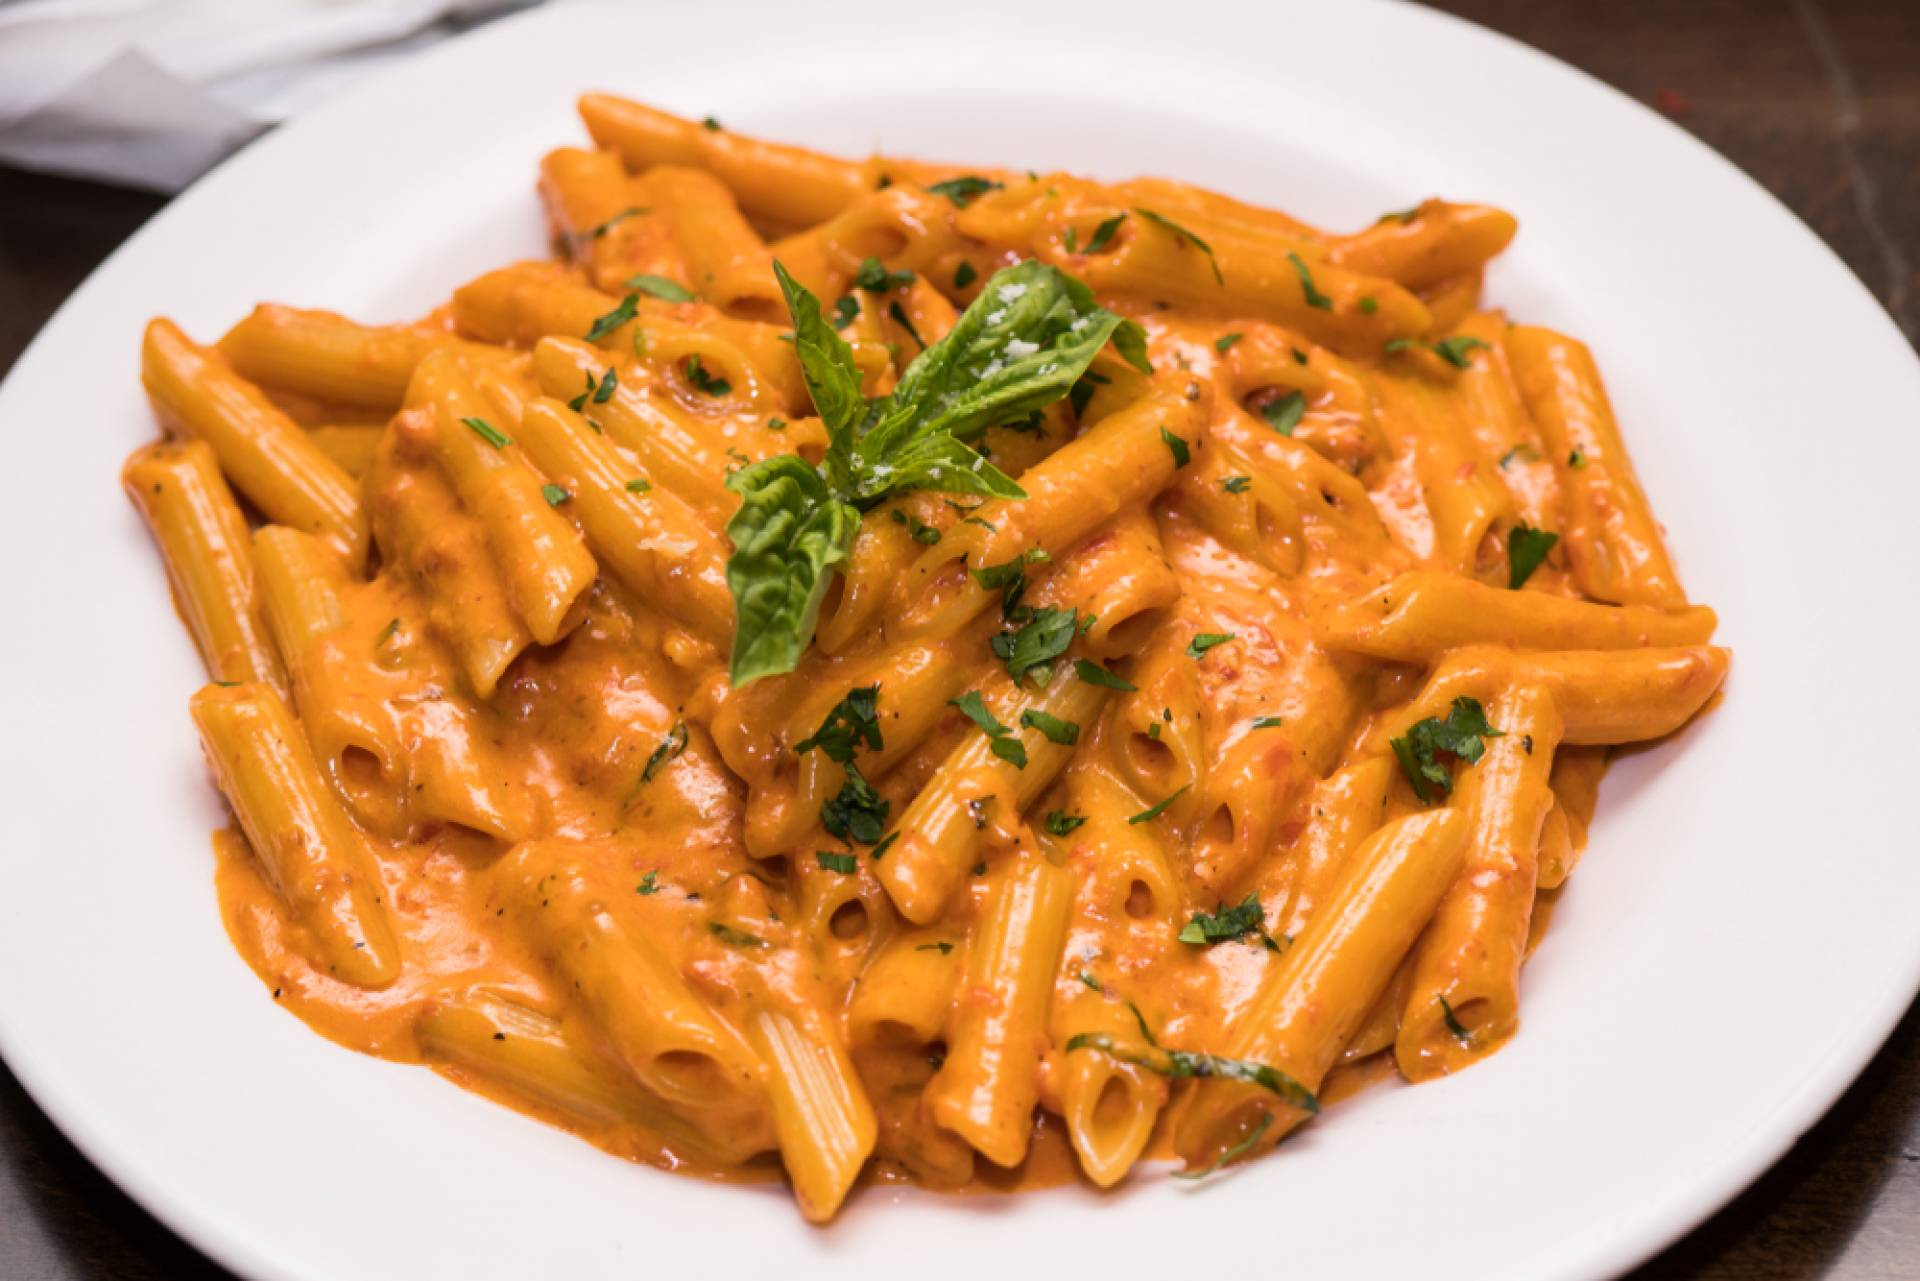 Penne with Grilled Chicken and Pink Vodka Sauce